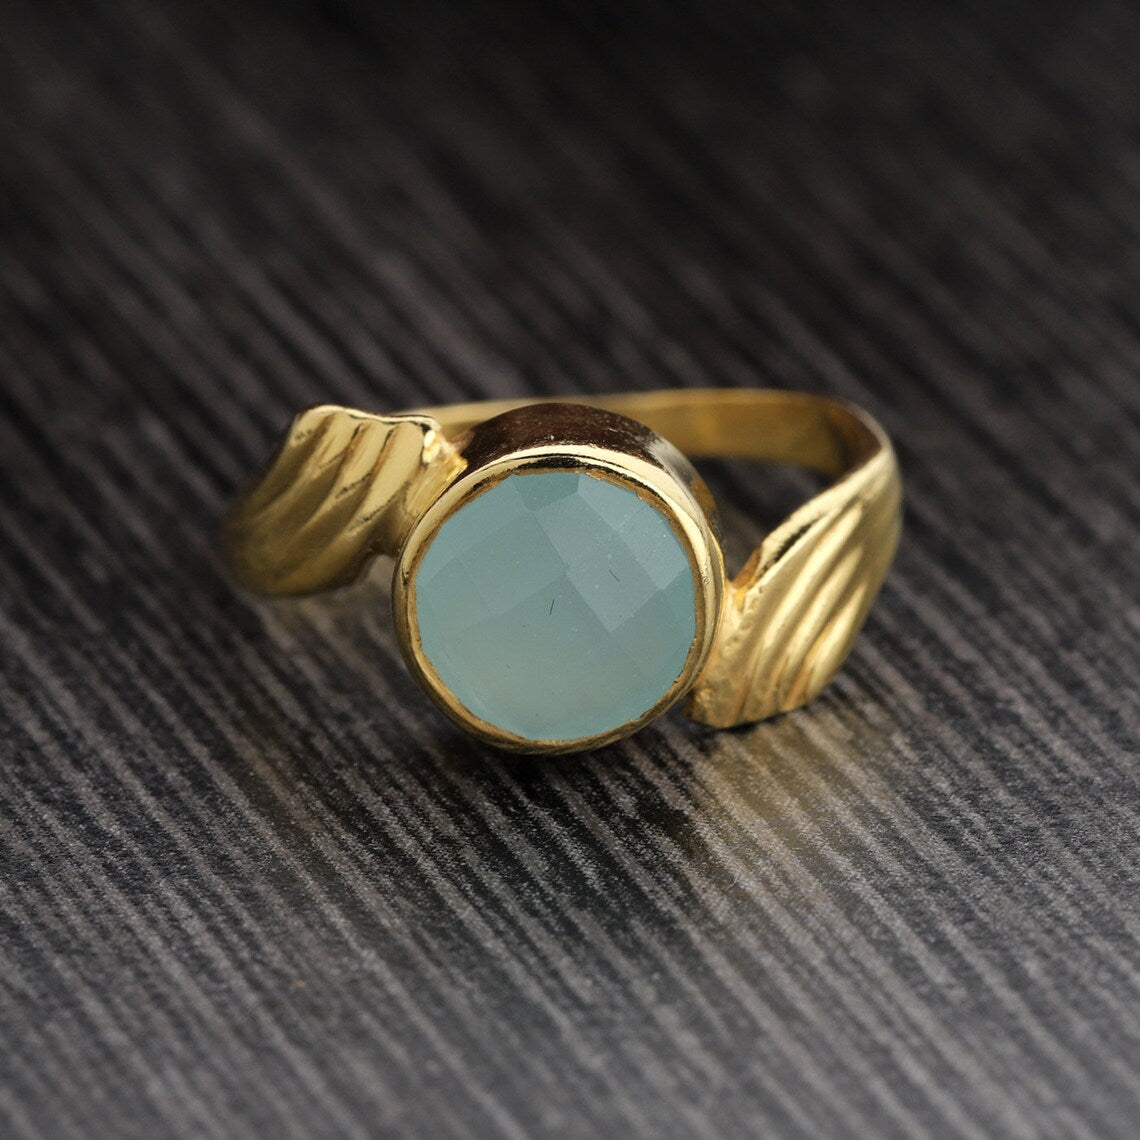 Everyday Ring - Blue Chalcedony Round Stone - 925 Sterling Silver Ring with Gold Plating